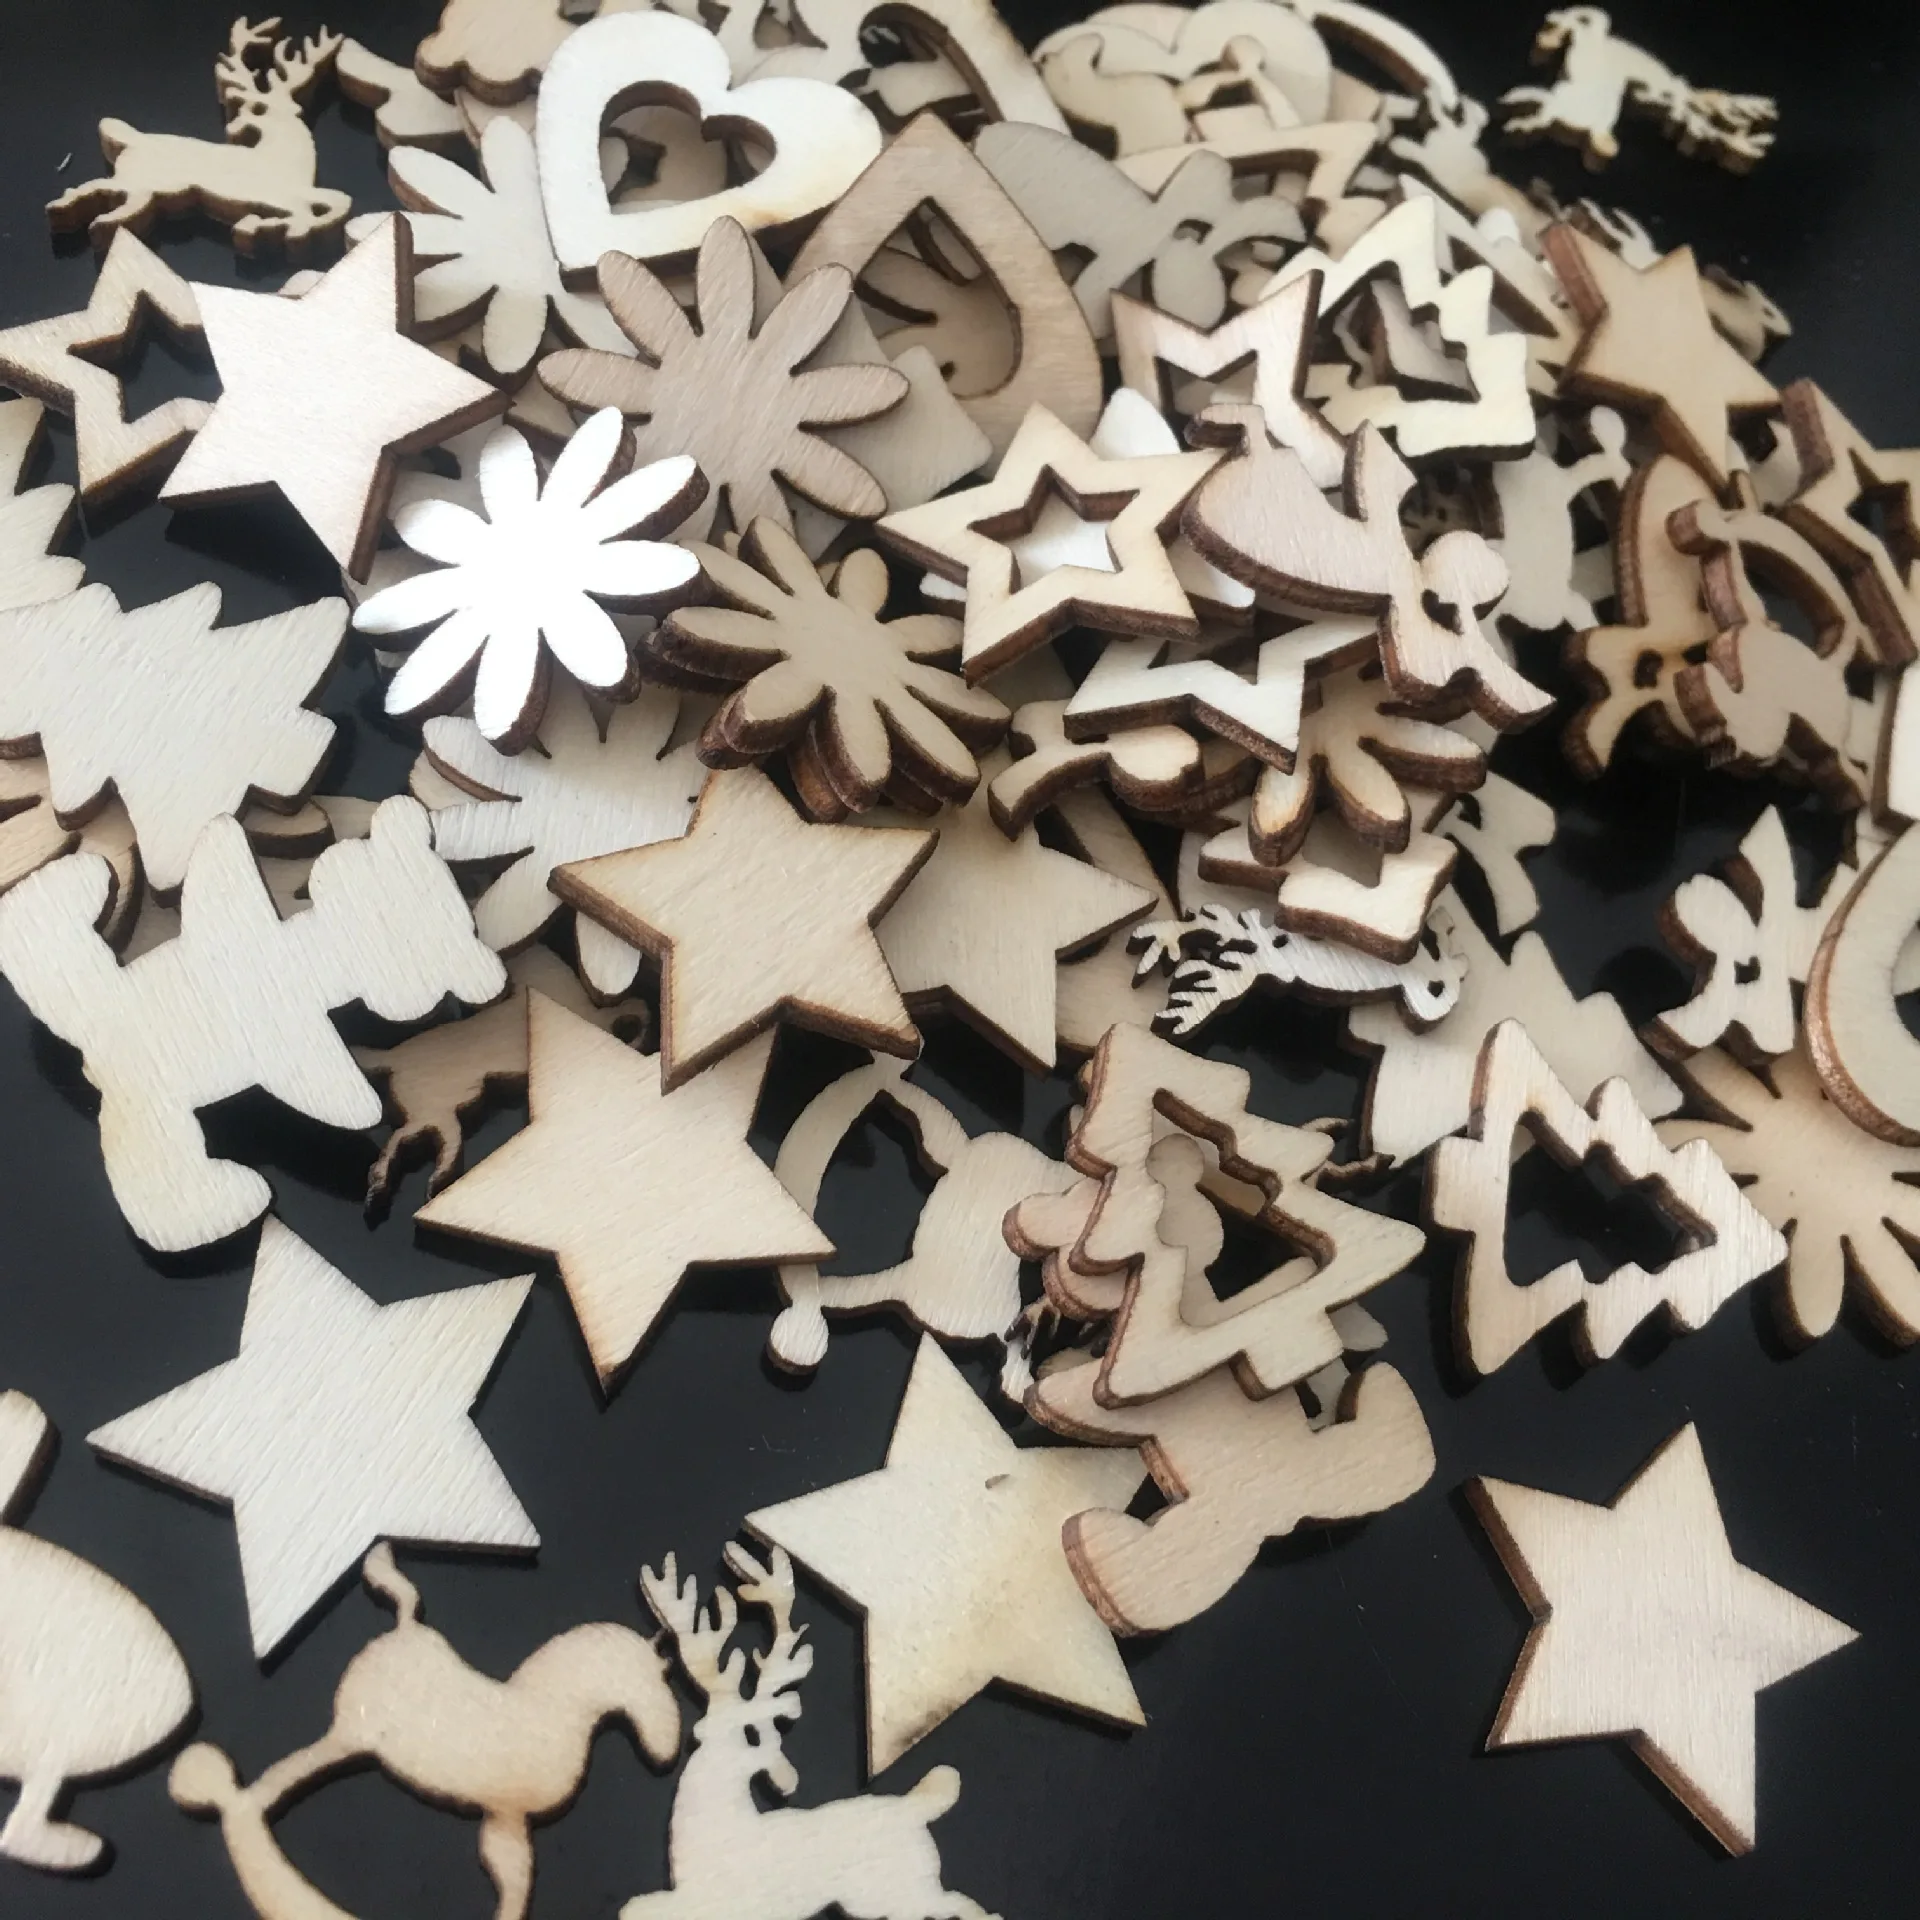 

100 Pcs Christmas Small Wooden Stickers Mixed Heart Xmas Tree Angel Elk Star Flower for Diy Elf Christmas Party Decoration